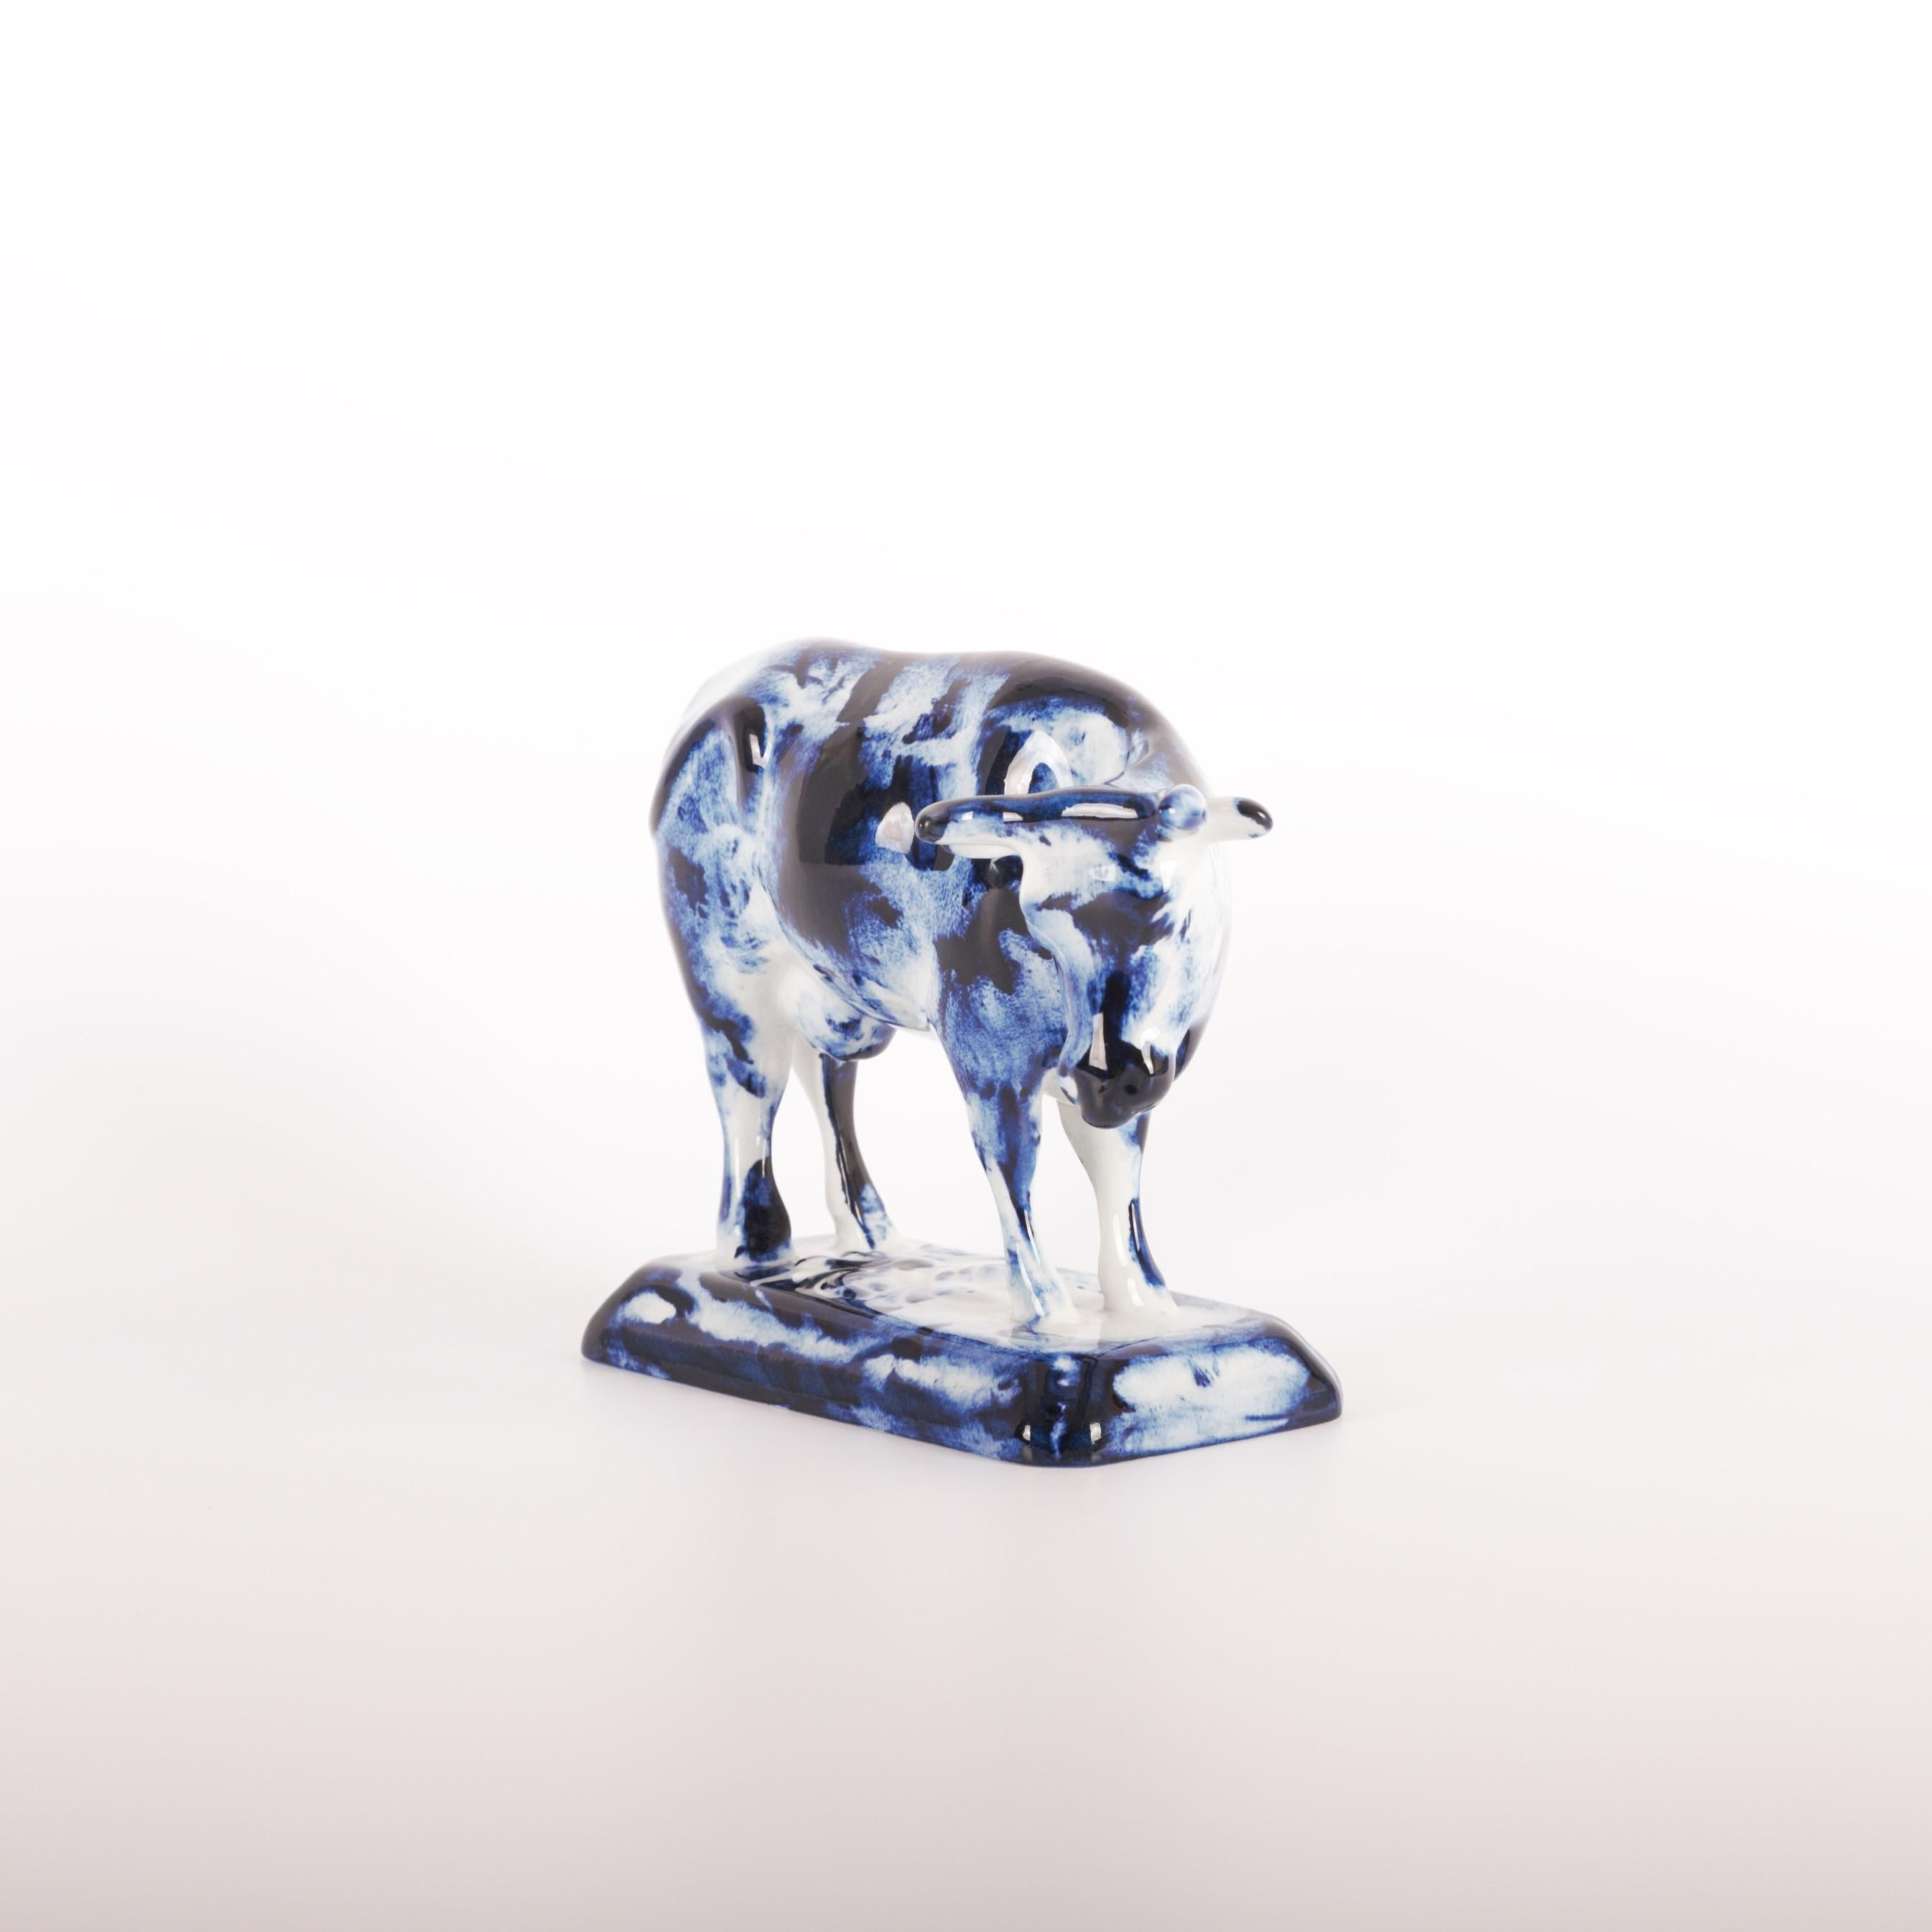 Glazed Delft Blue Cow #1, by Marcel Wanders, Hand Painted, 2006, Unique For Sale